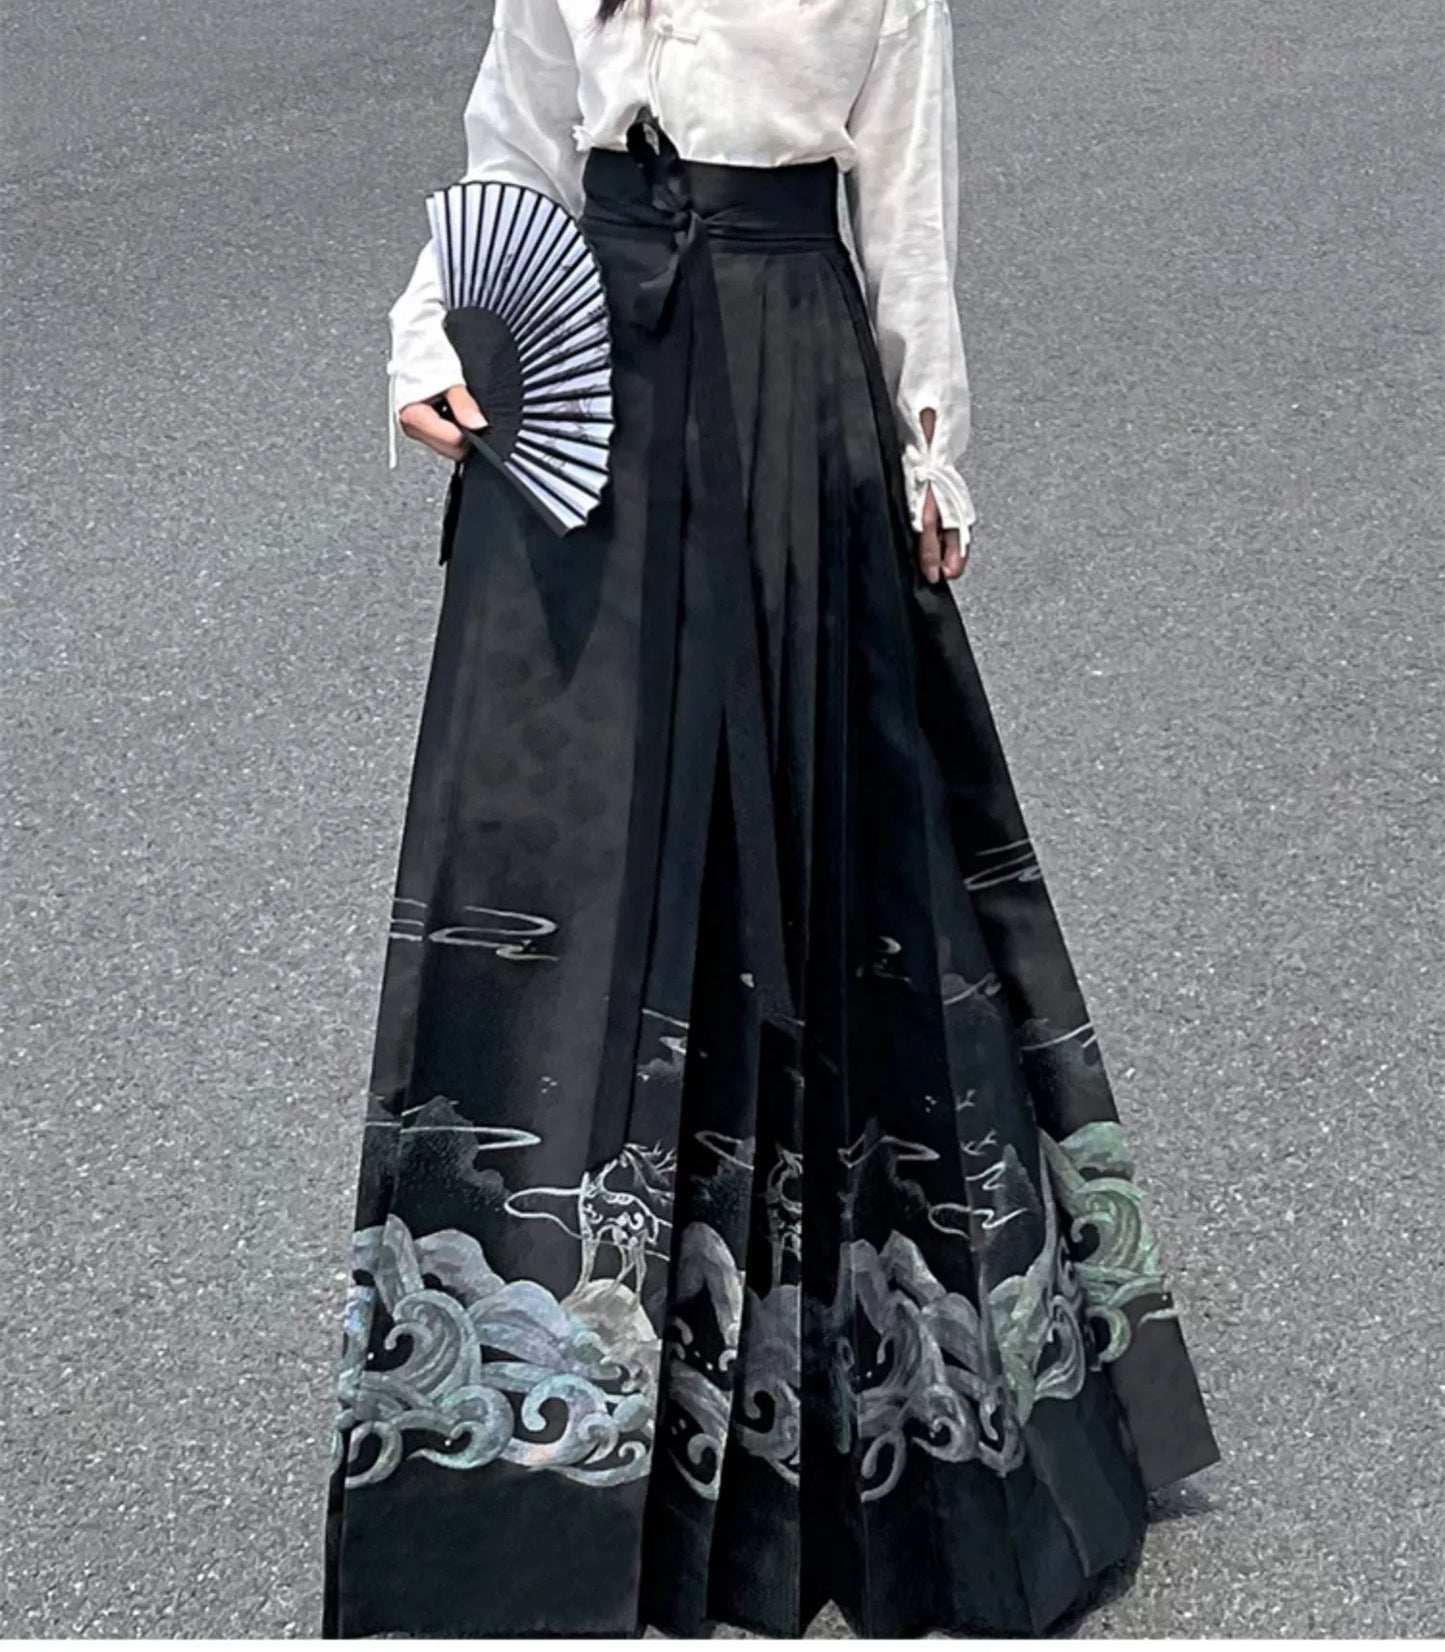 Explore modern elegance with our Black & White Shirt Women's Horse Face Skirt Suit. This ensemble blends traditional Hanfu design with contemporary flair, featuring intricate embroidery and authentic details. Embrace the timeless beauty of Hanfu fashion and make a statement with your unique style.